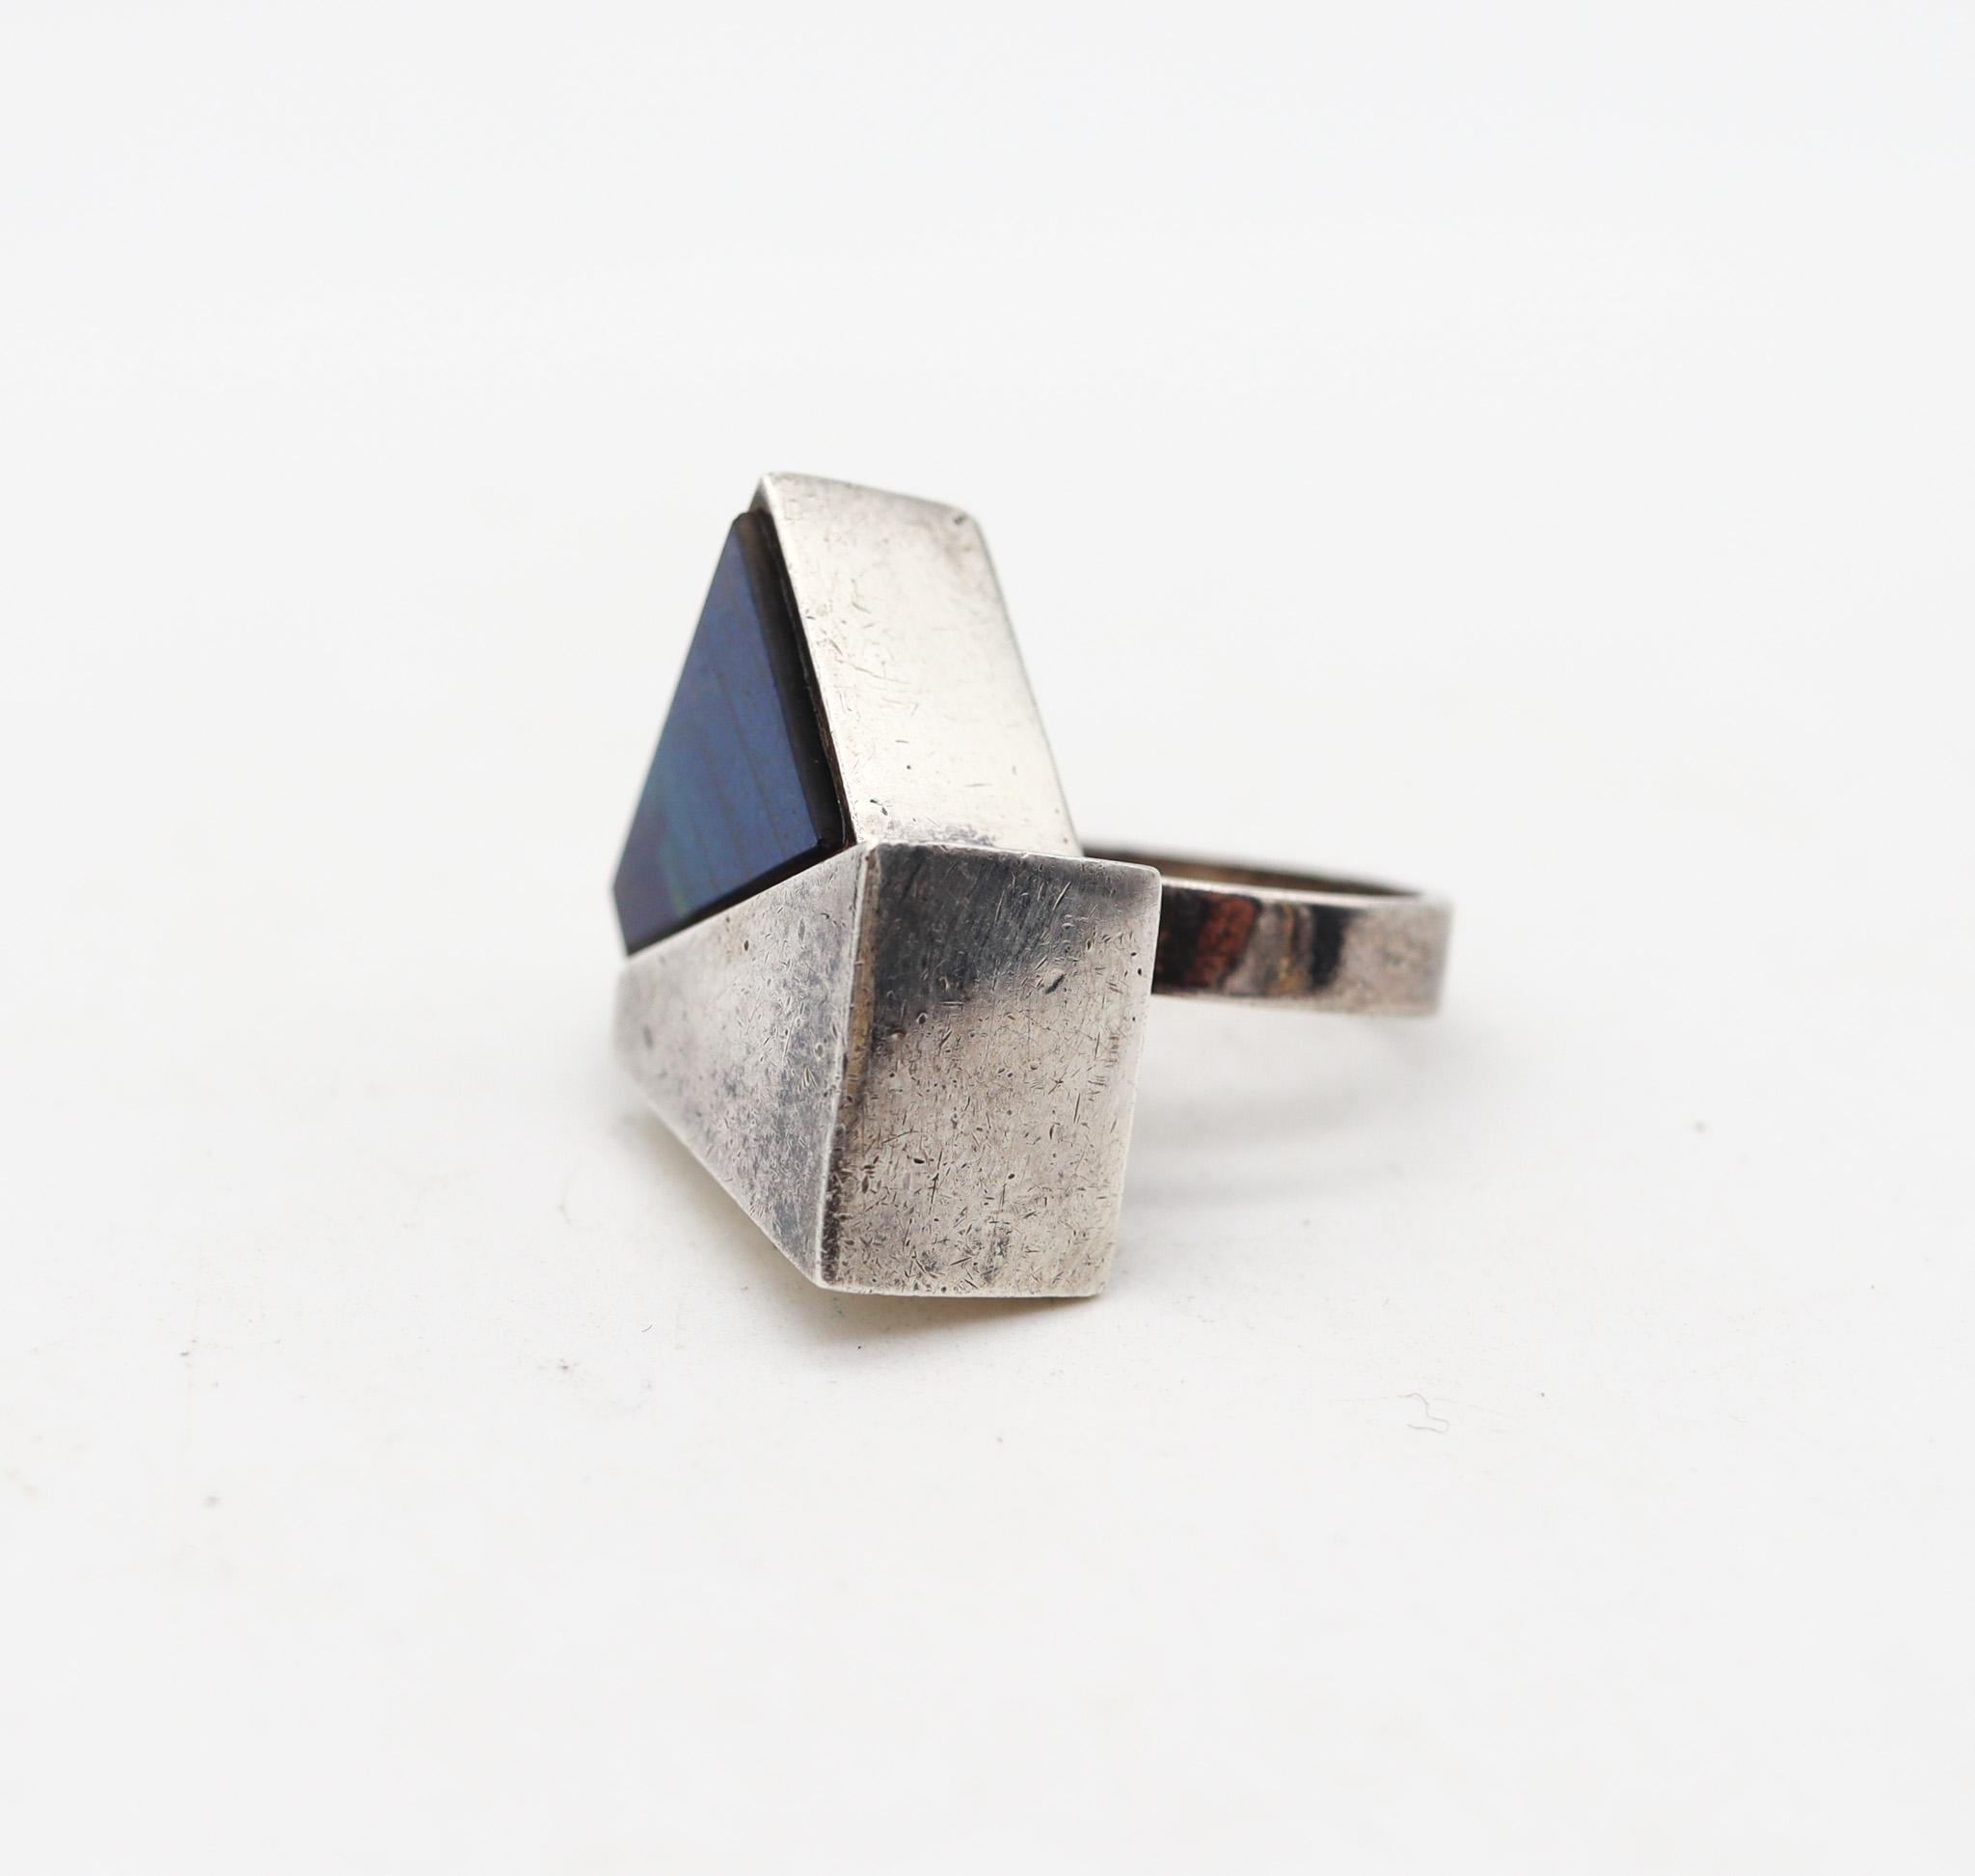 Geometric ring designed by Kaunis Koru.

Absolutely beautiful modernist ring, created in Helsinki Finland by Kaunis Koru, back in 1974. Designed as a toi et moi ring, with two geometric trapezoids in .925/.999 solid sterling silver with high